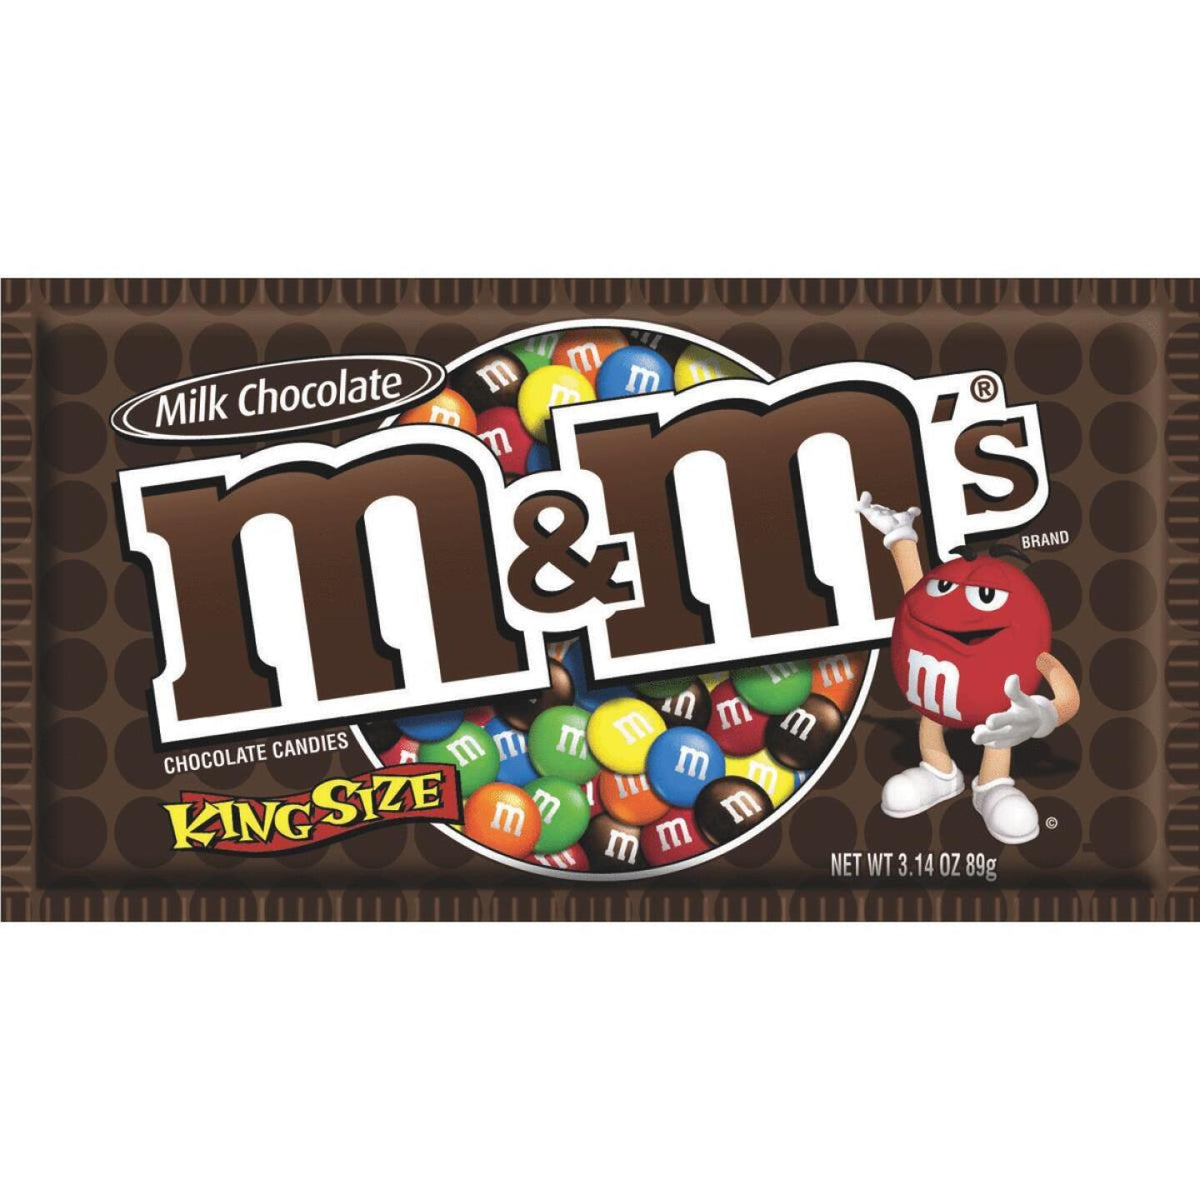 Plain M&M's Candy, Chocolate Candy, Mars Candy